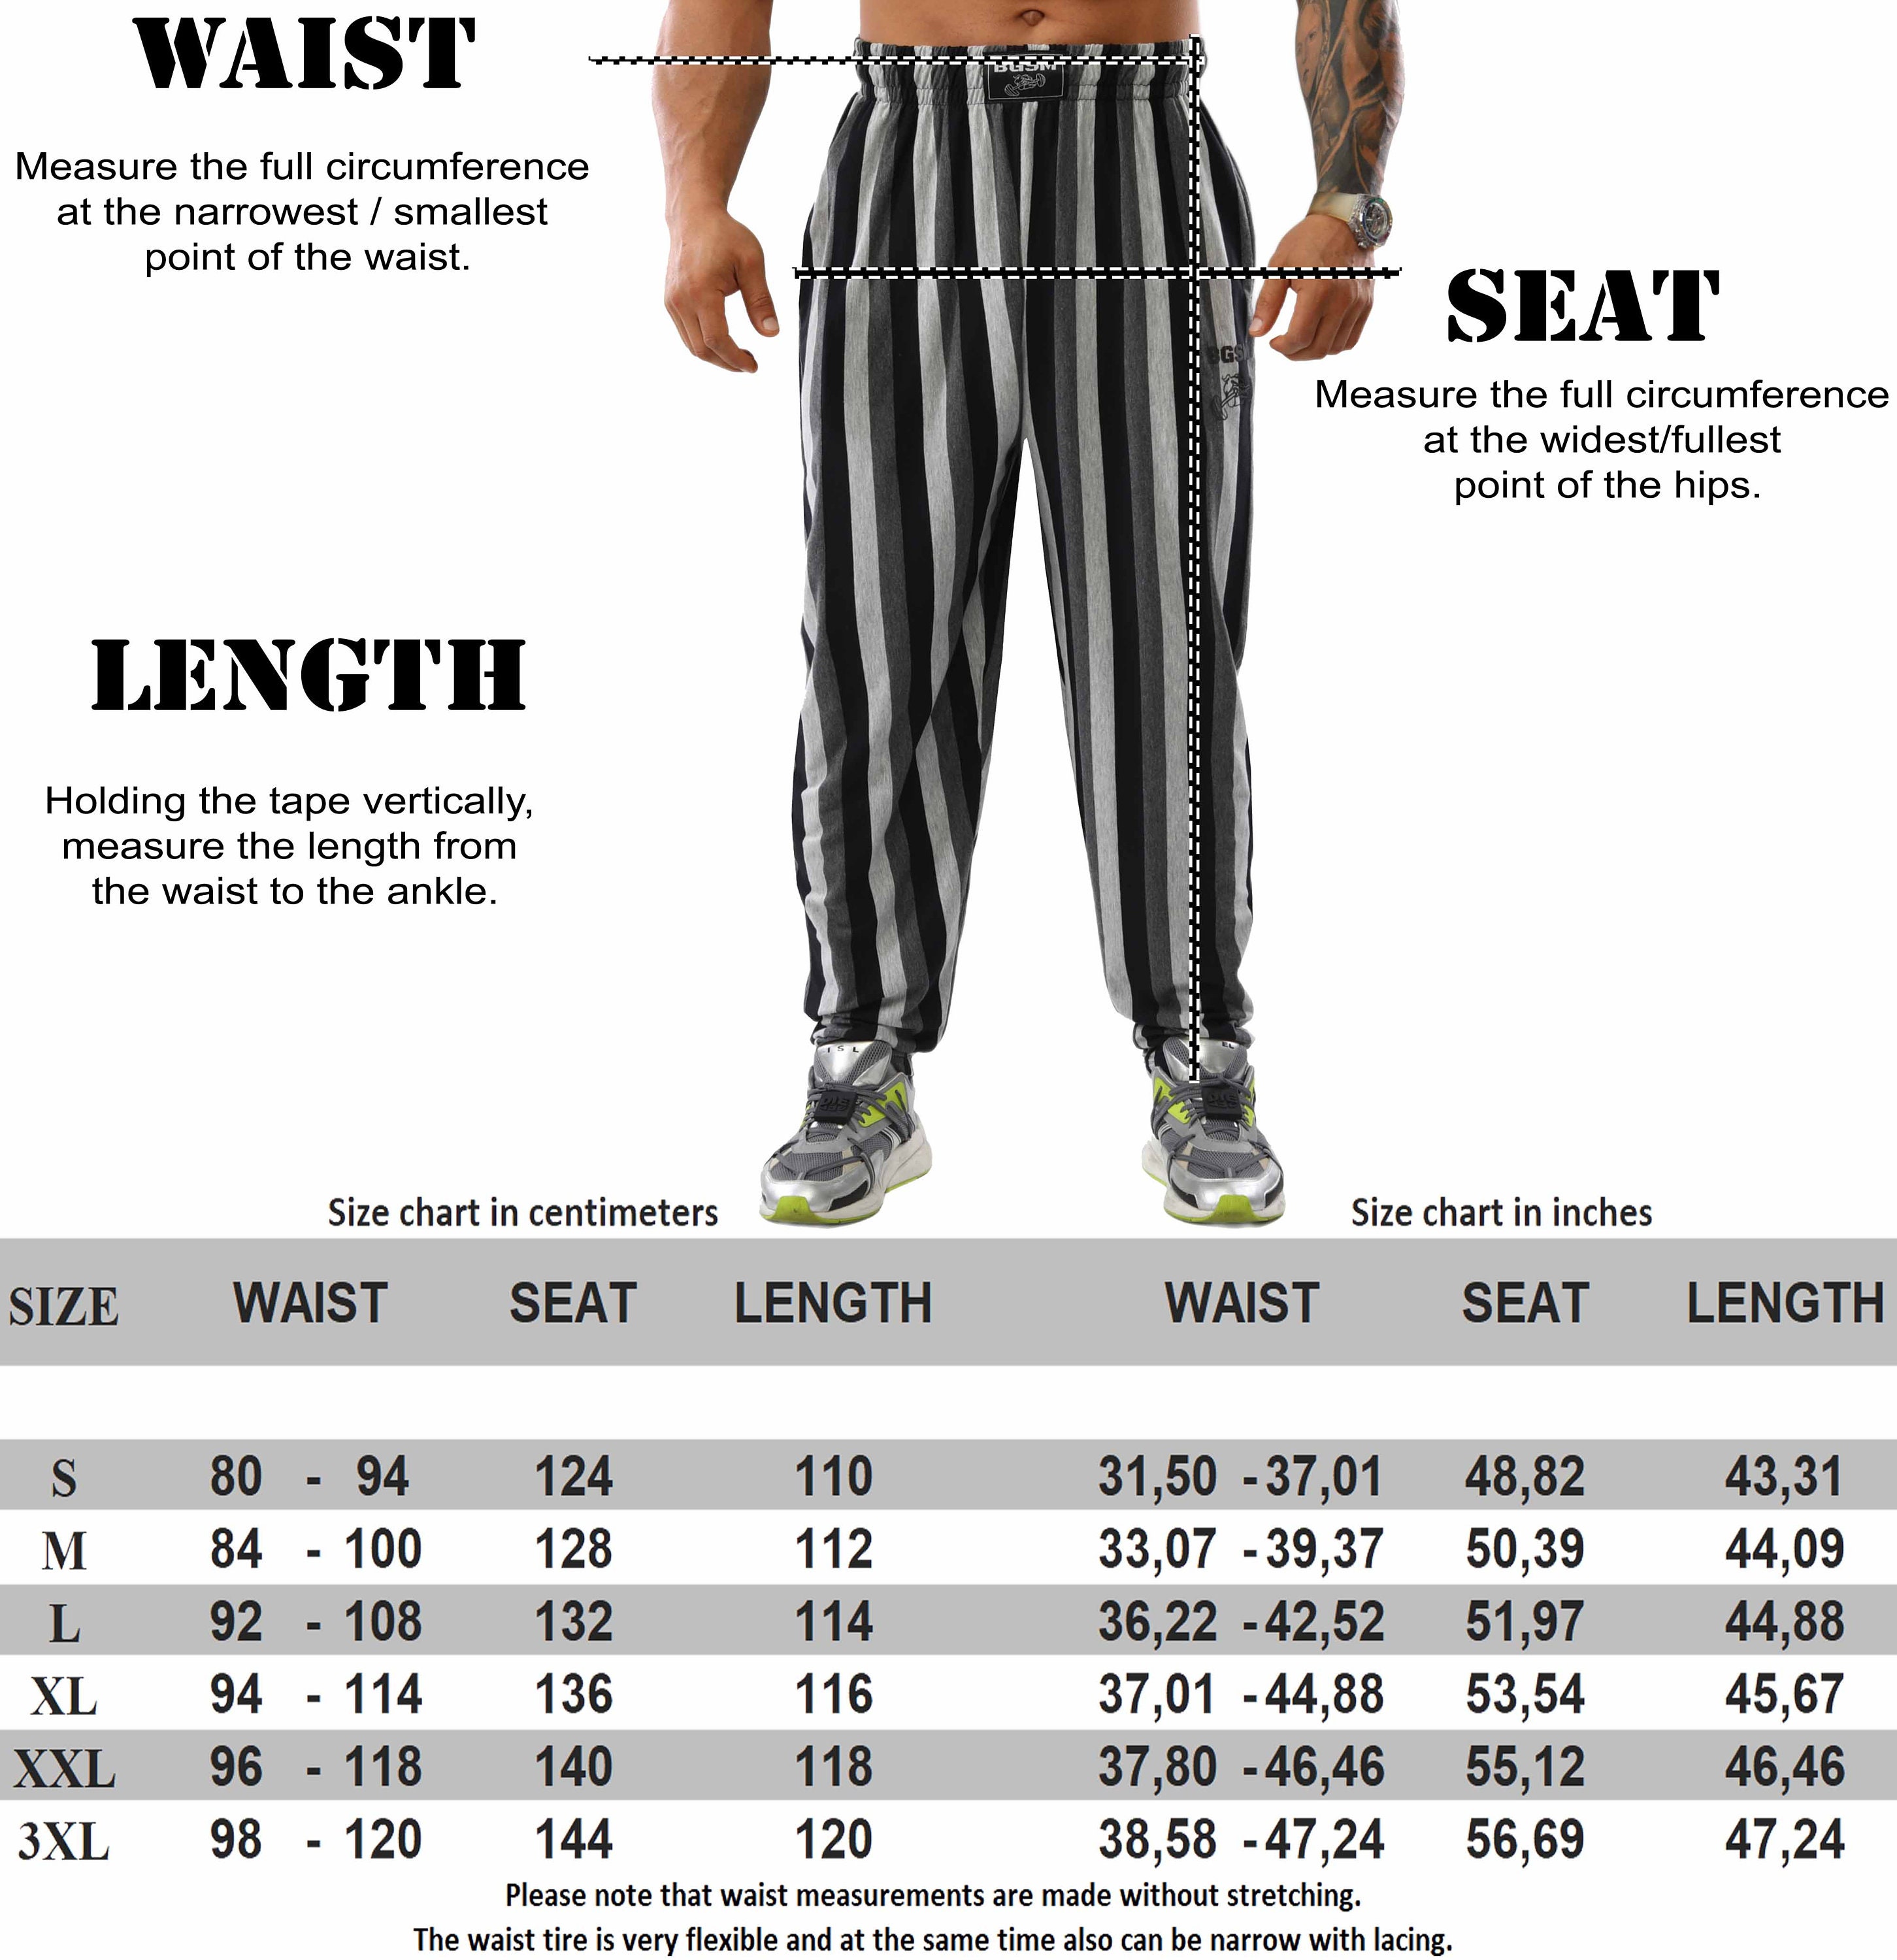 Buy Men's Baggy Sweatpants With Pockets, Oldschool Gym Muscle